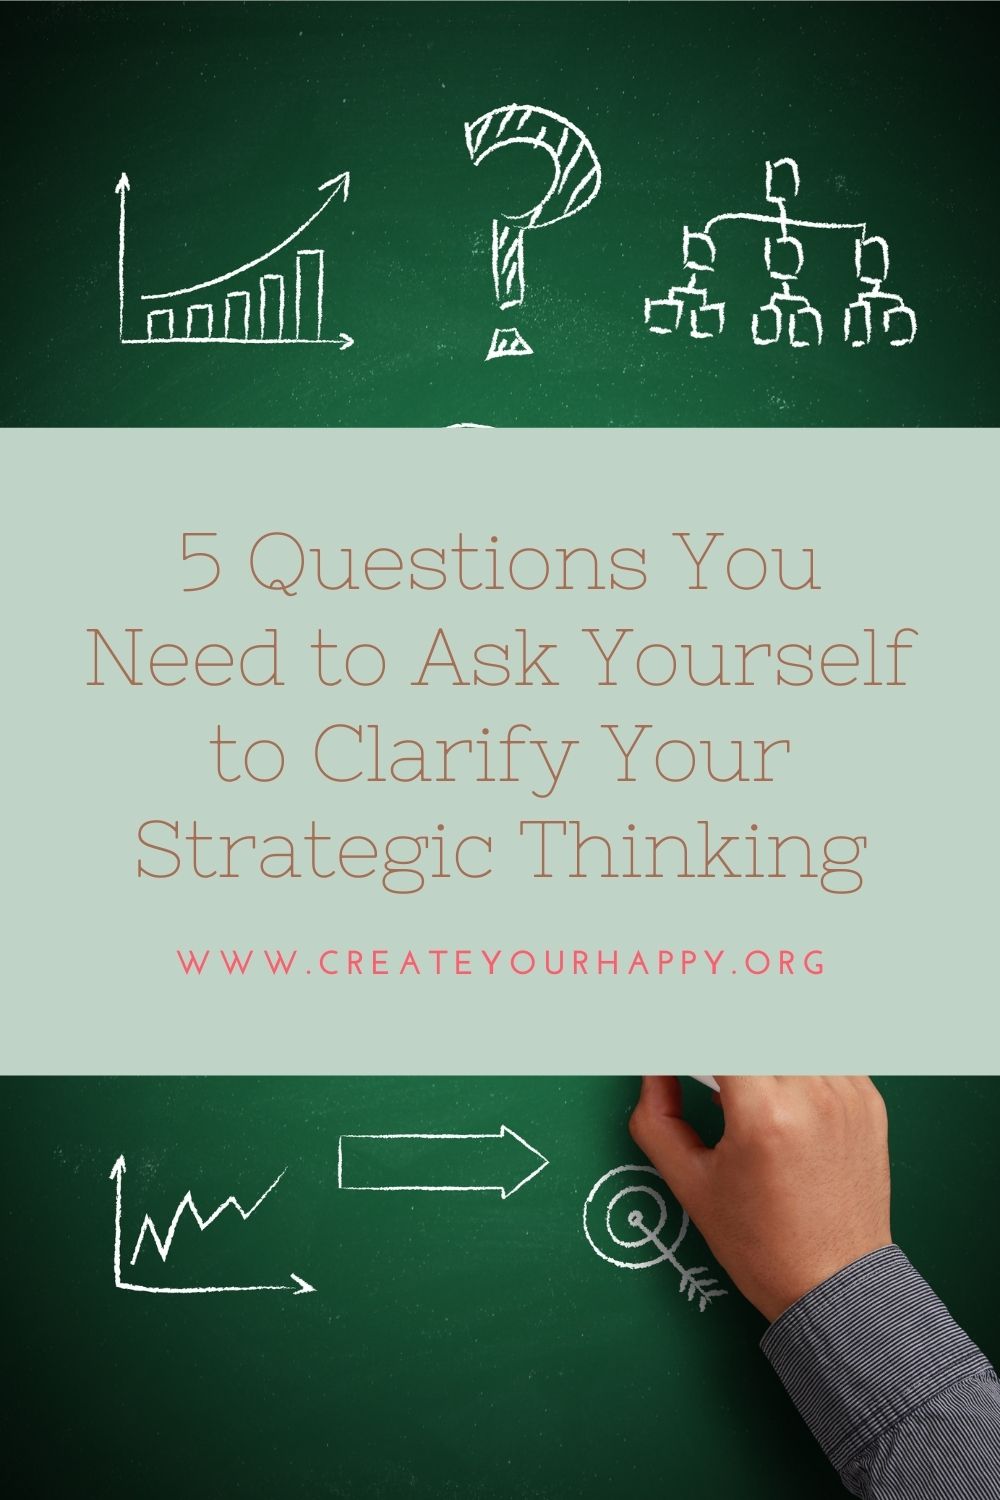 5 Questions You Need to Ask Yourself to Clarify Your Strategic Thinking